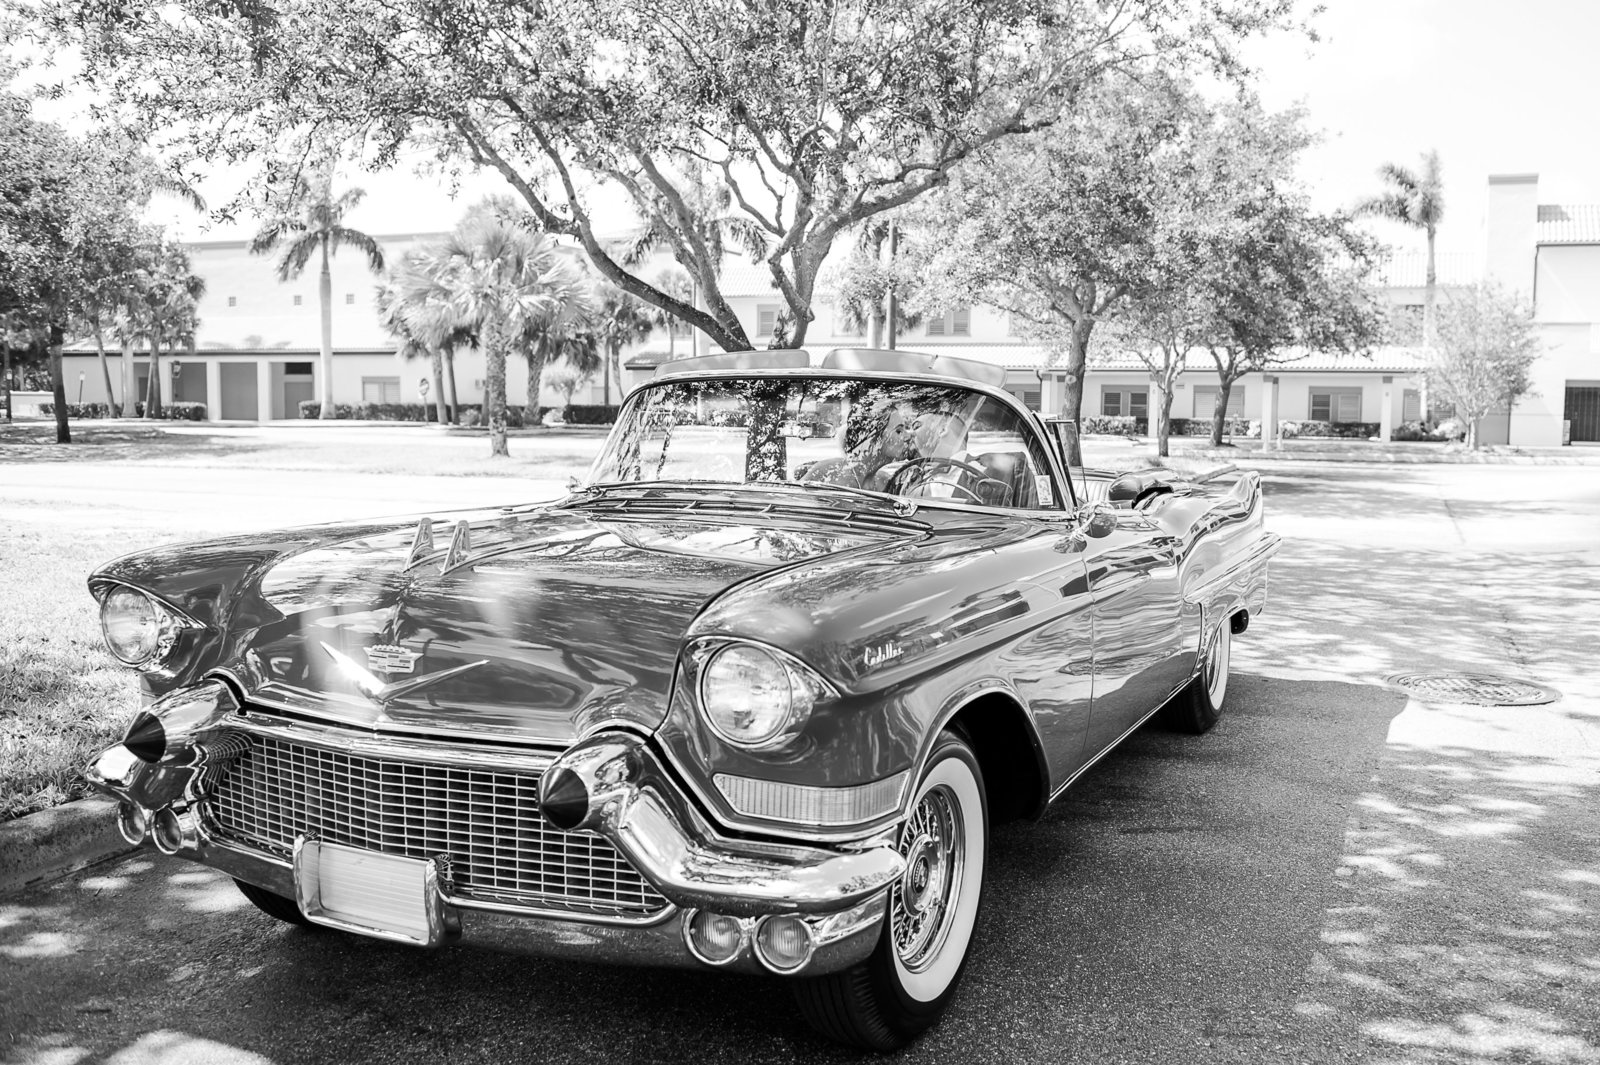 Bride and Groom Classic Car - Country Club at Mirasol Wedding - Palm Beach Wedding Photography by Palm Beach Photography, Inc.